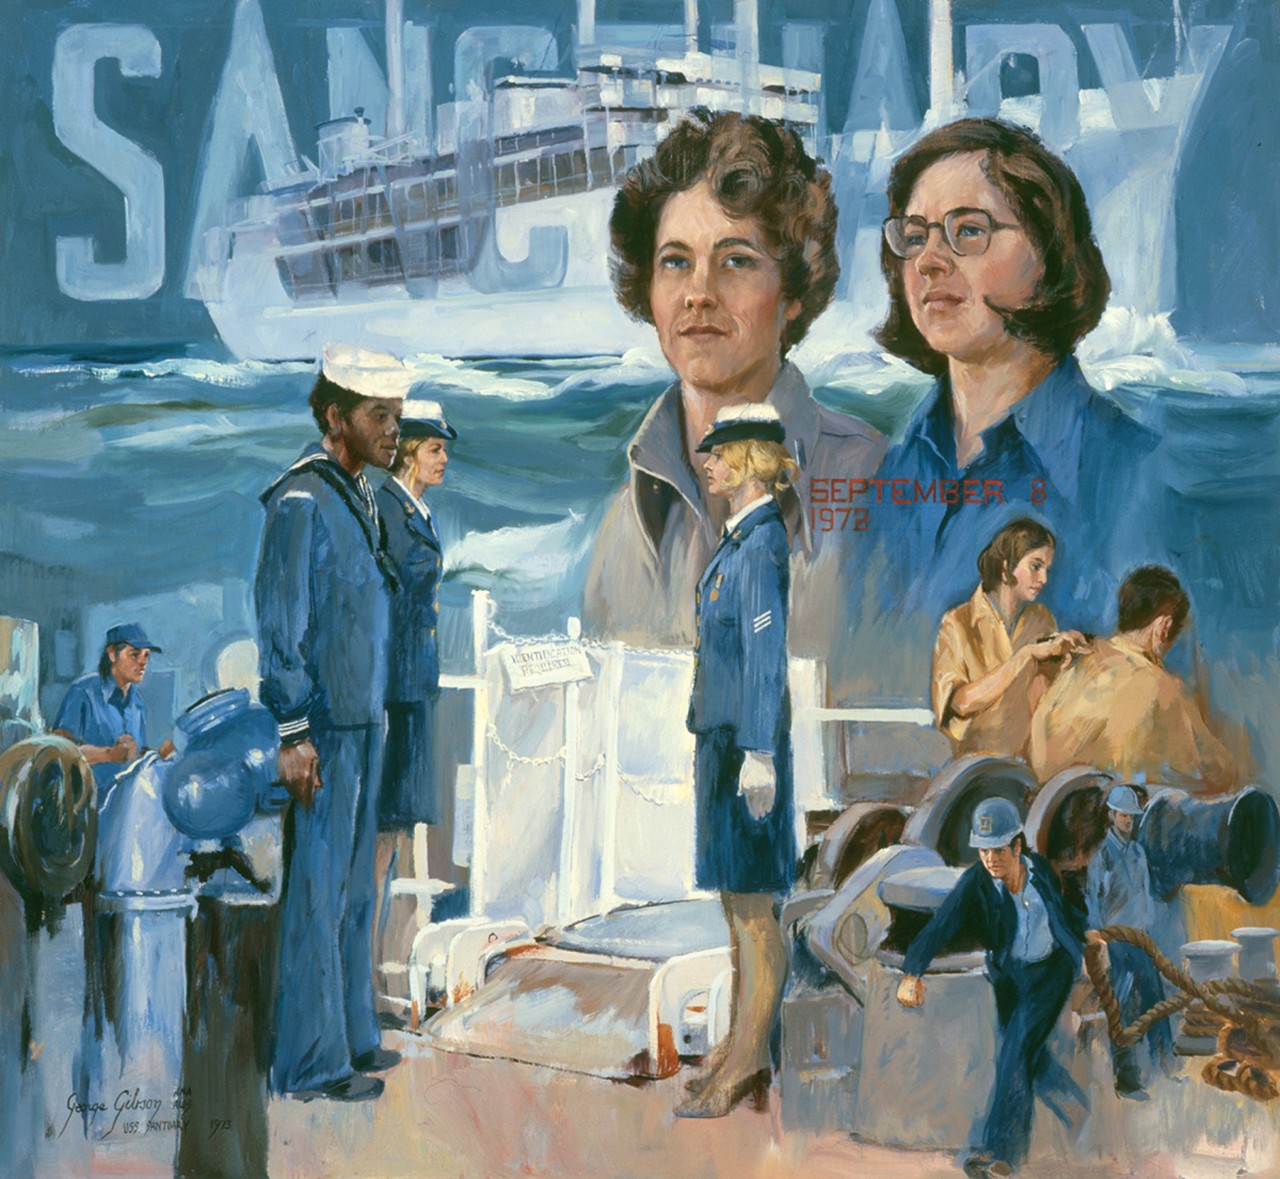 A montage of women and African Americans on the USS Sanctuary